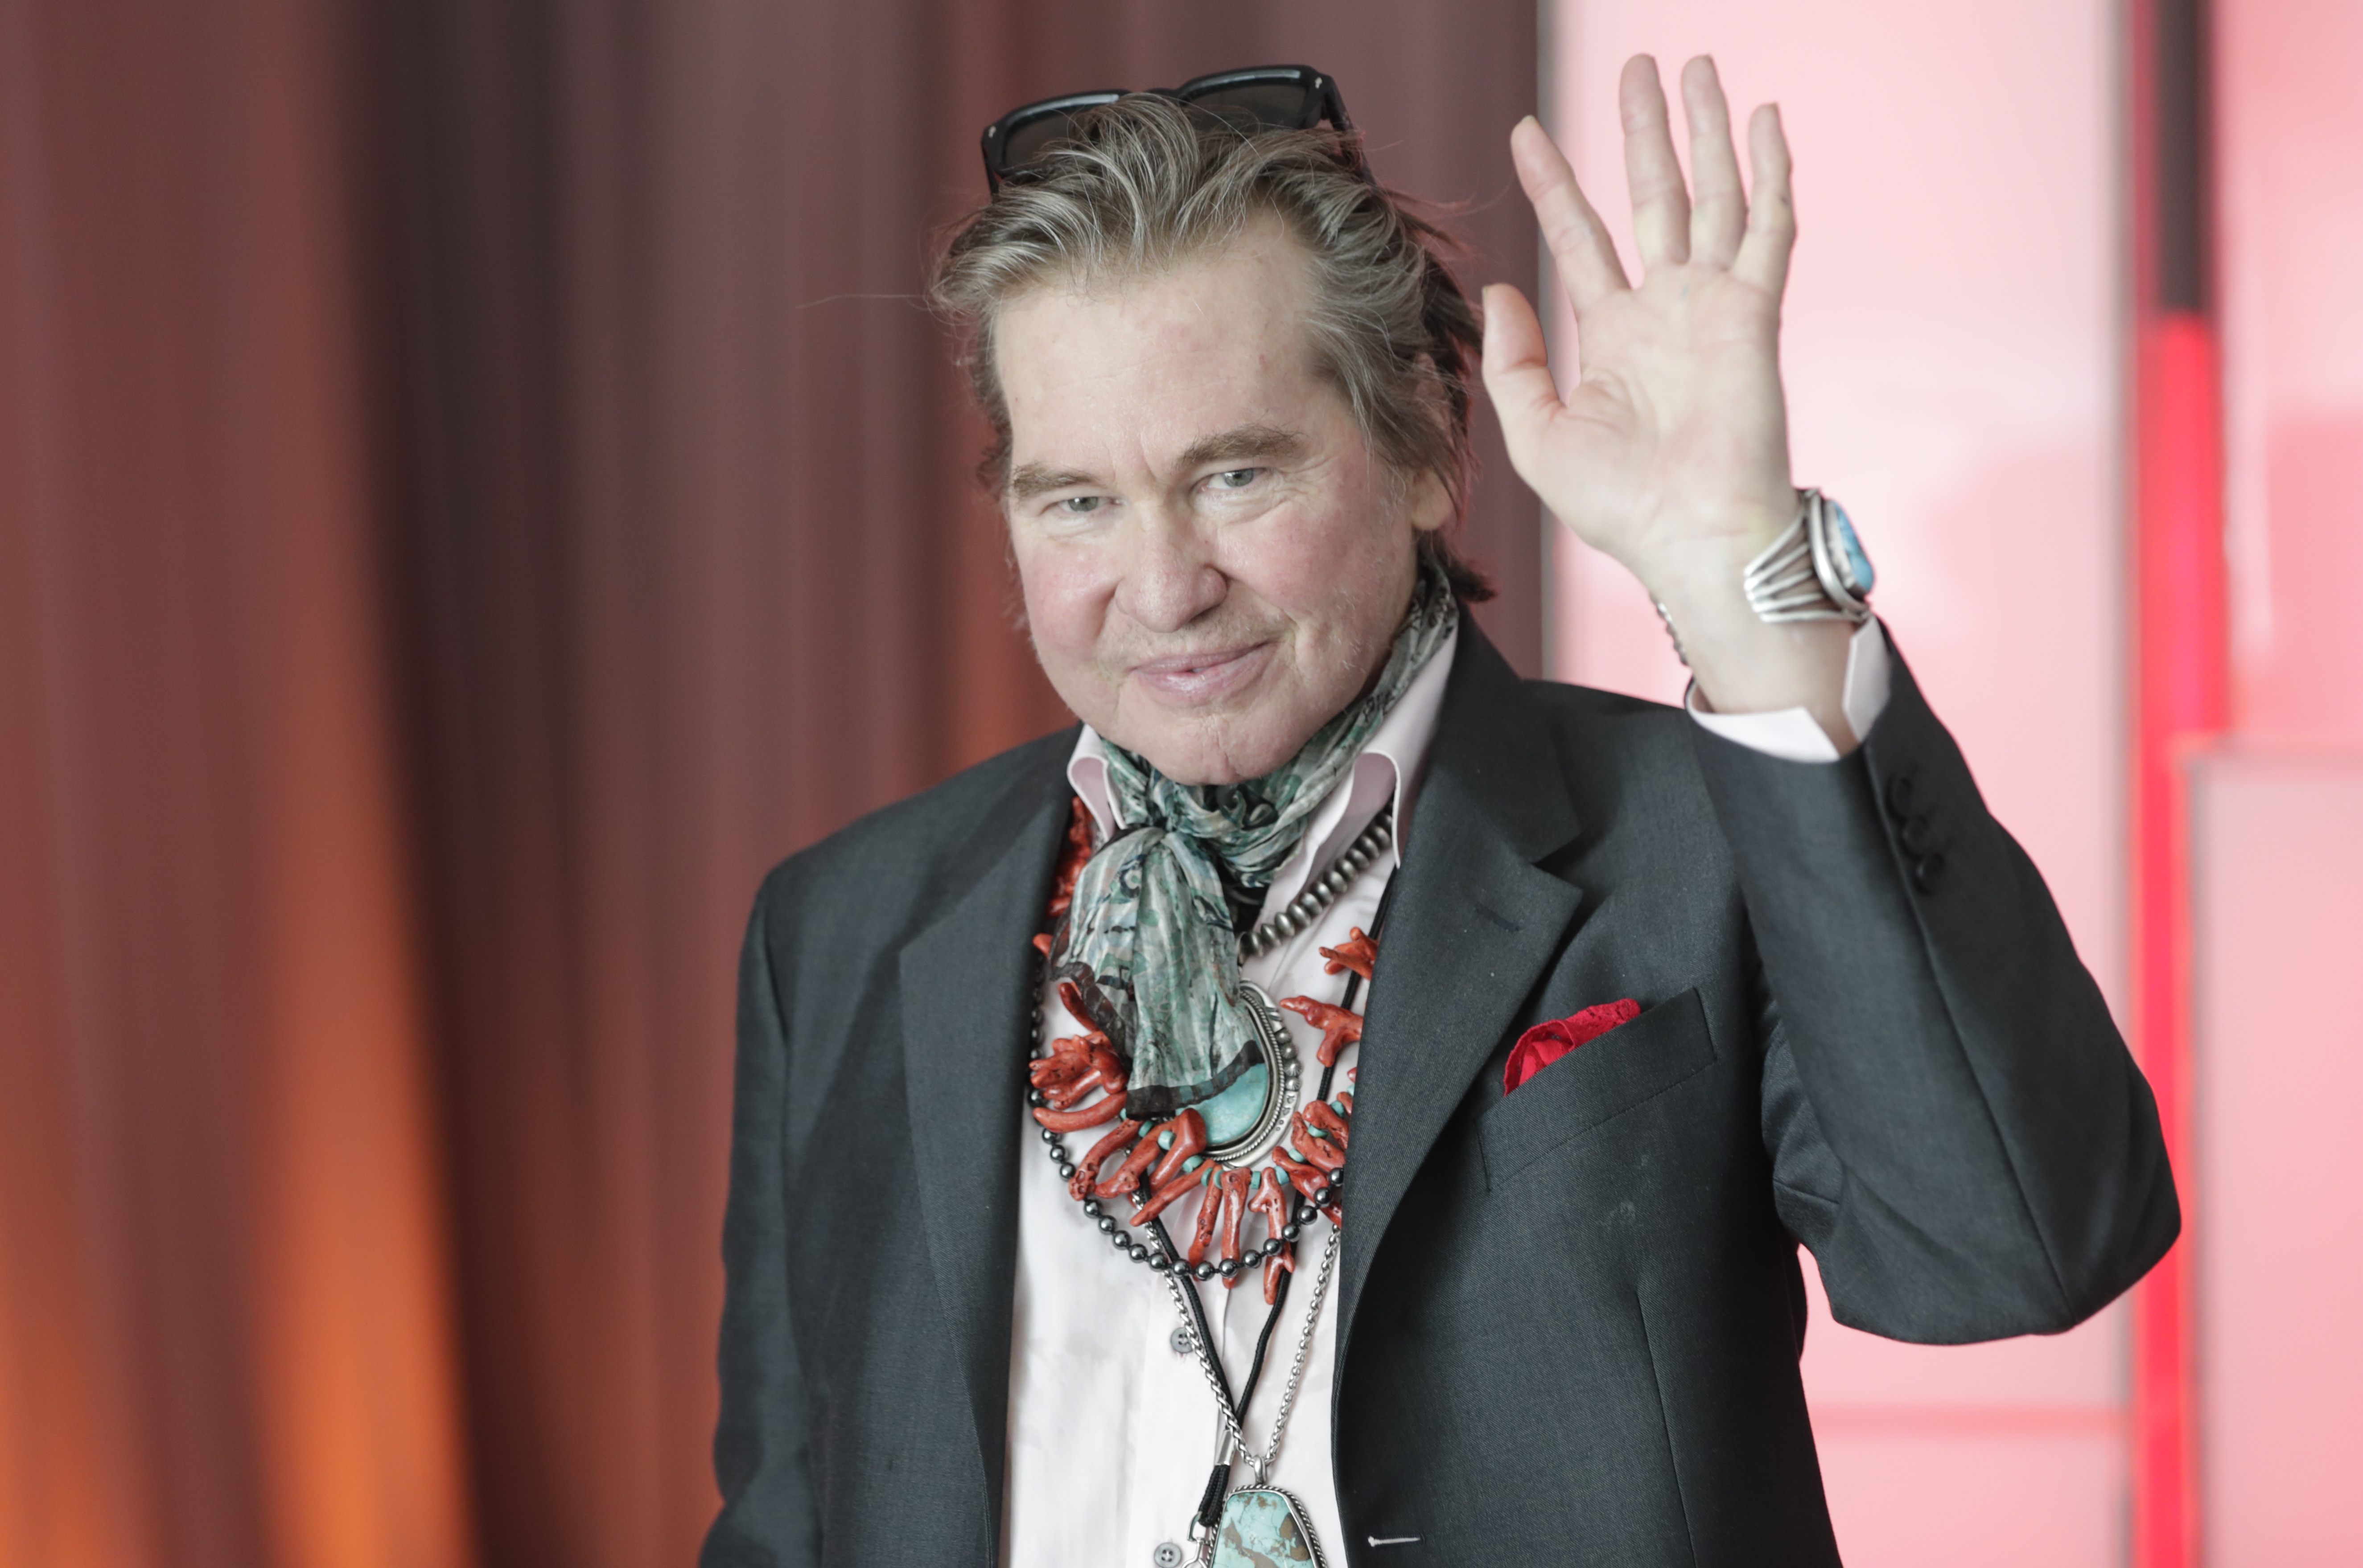 Val Kilmer visits the United Nations headquarters in New York City to promote the 17 Sustainable Development Goals (SDGs) initiative, on July 20, 2019. | Source: Getty Images